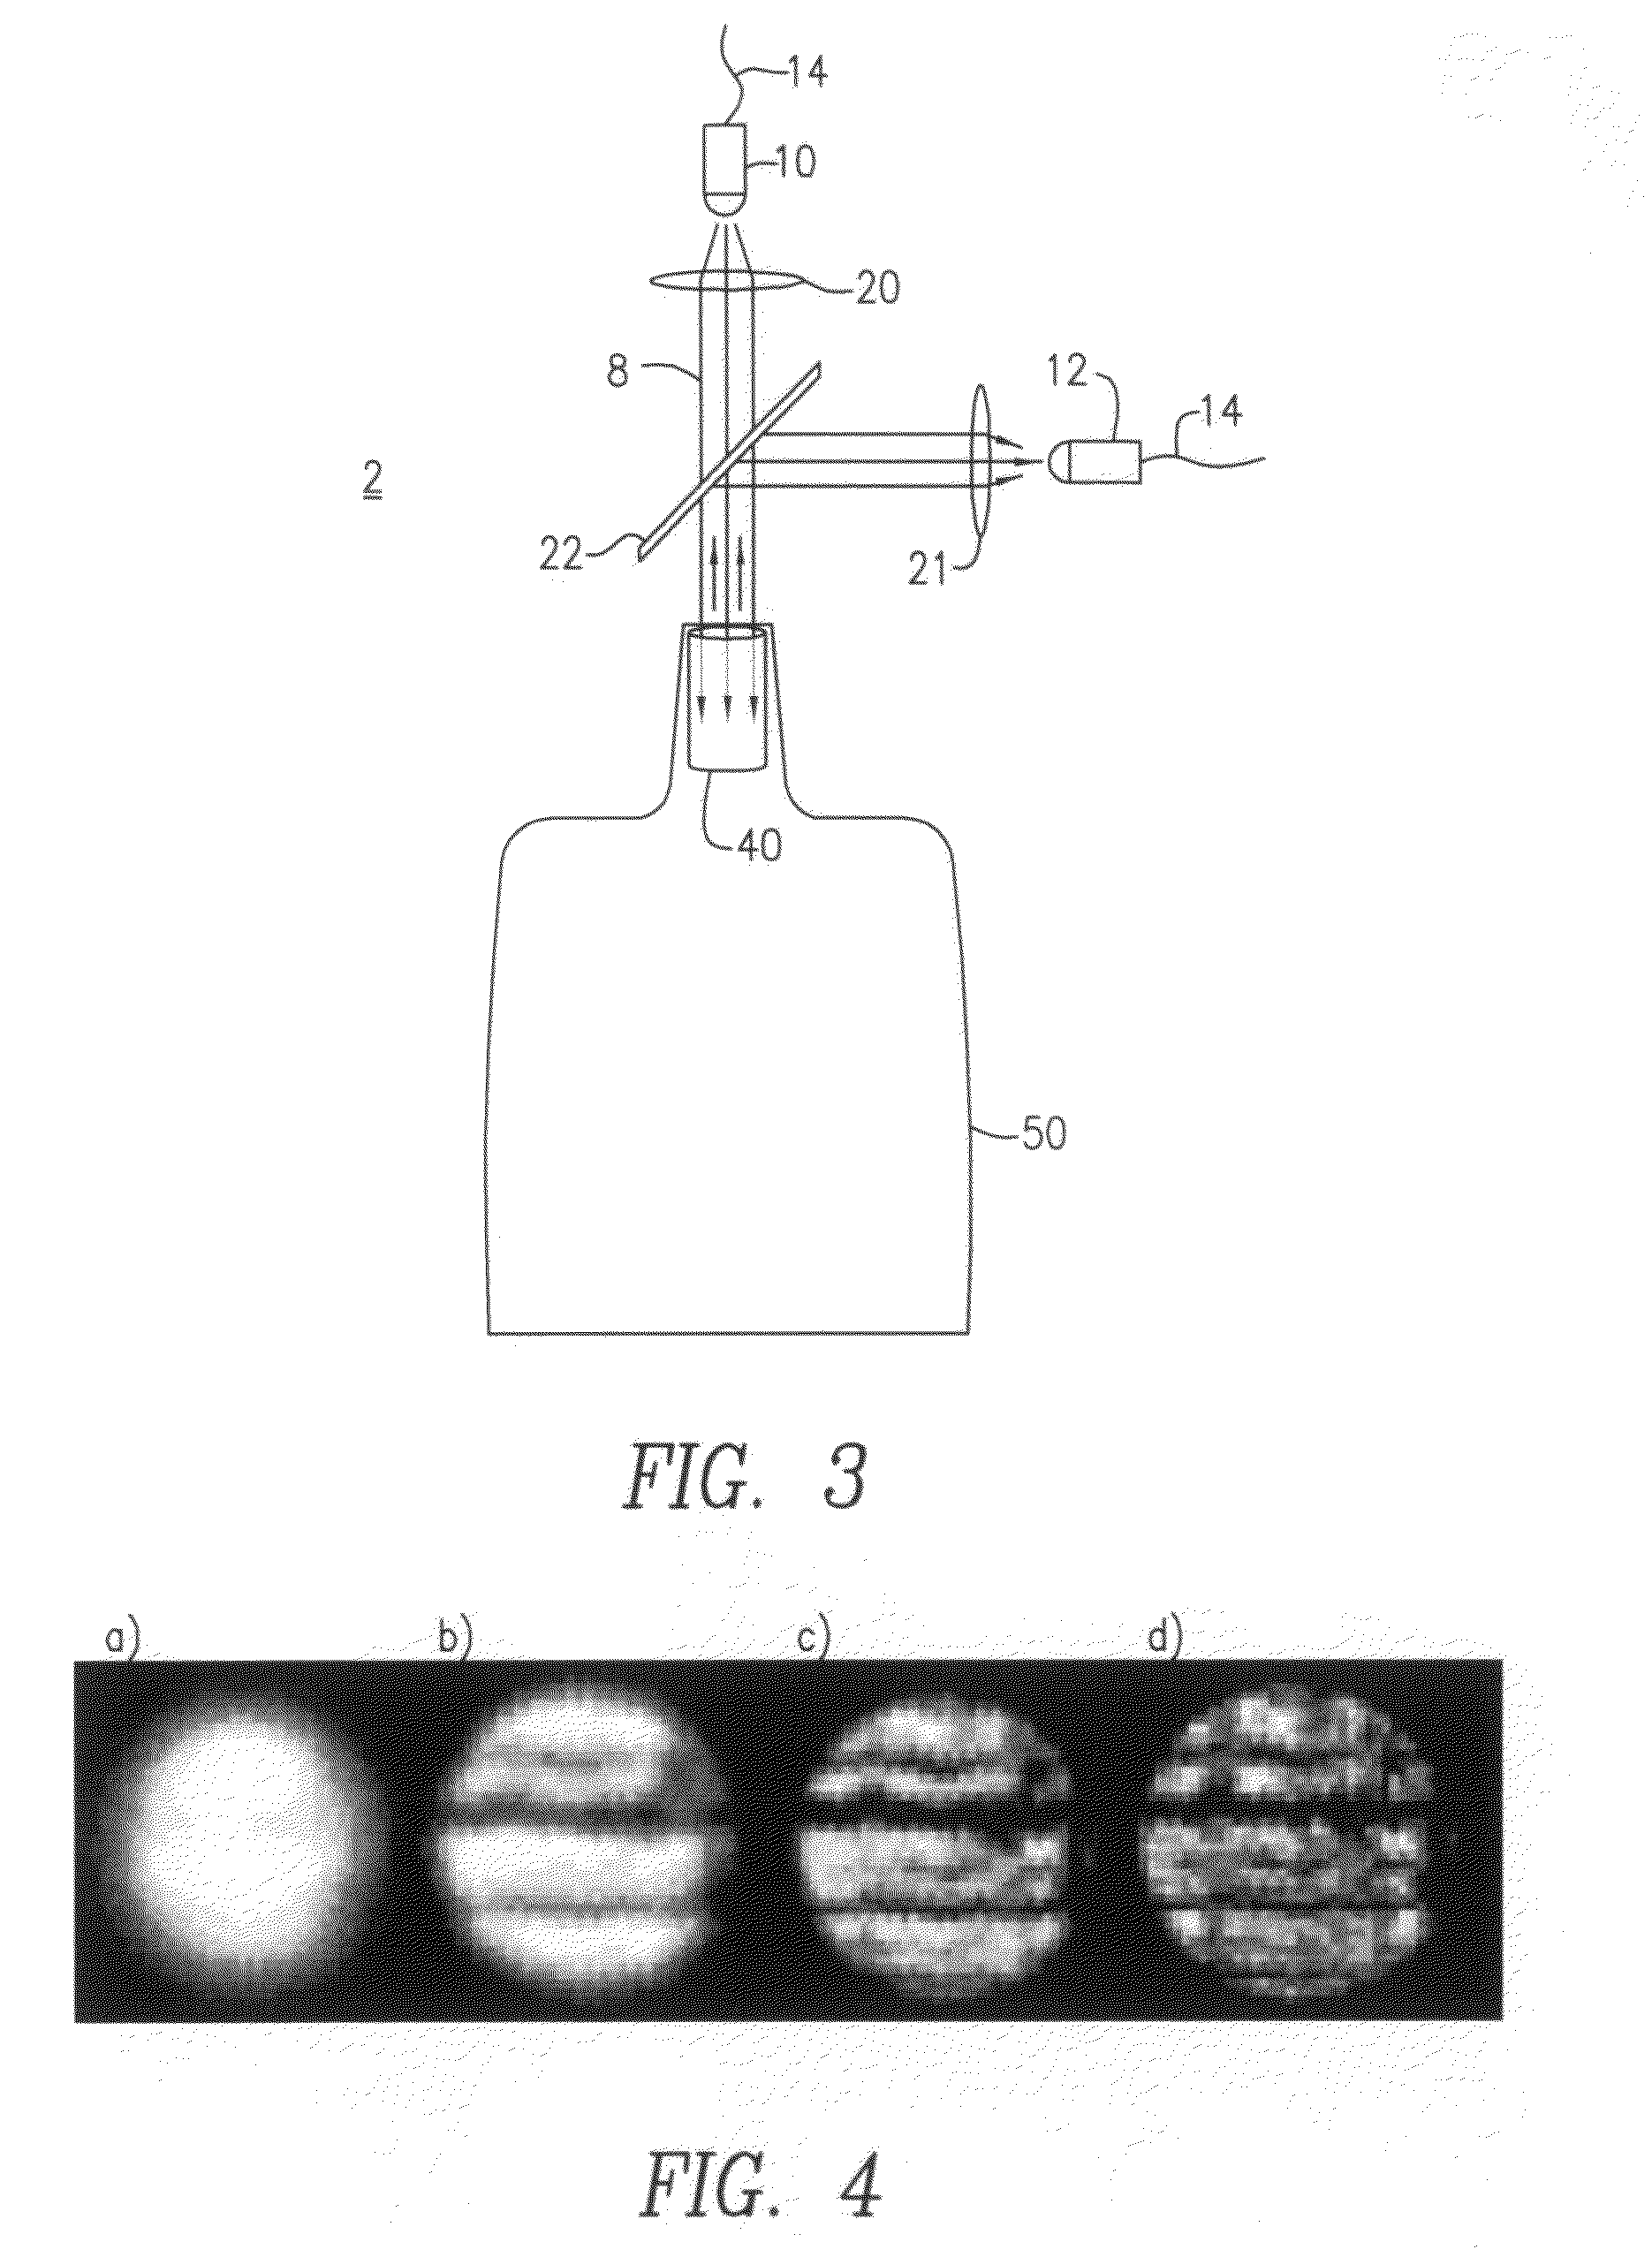 Methods and Apparatus for the Non-Destructive Detection of Variations in a Sample